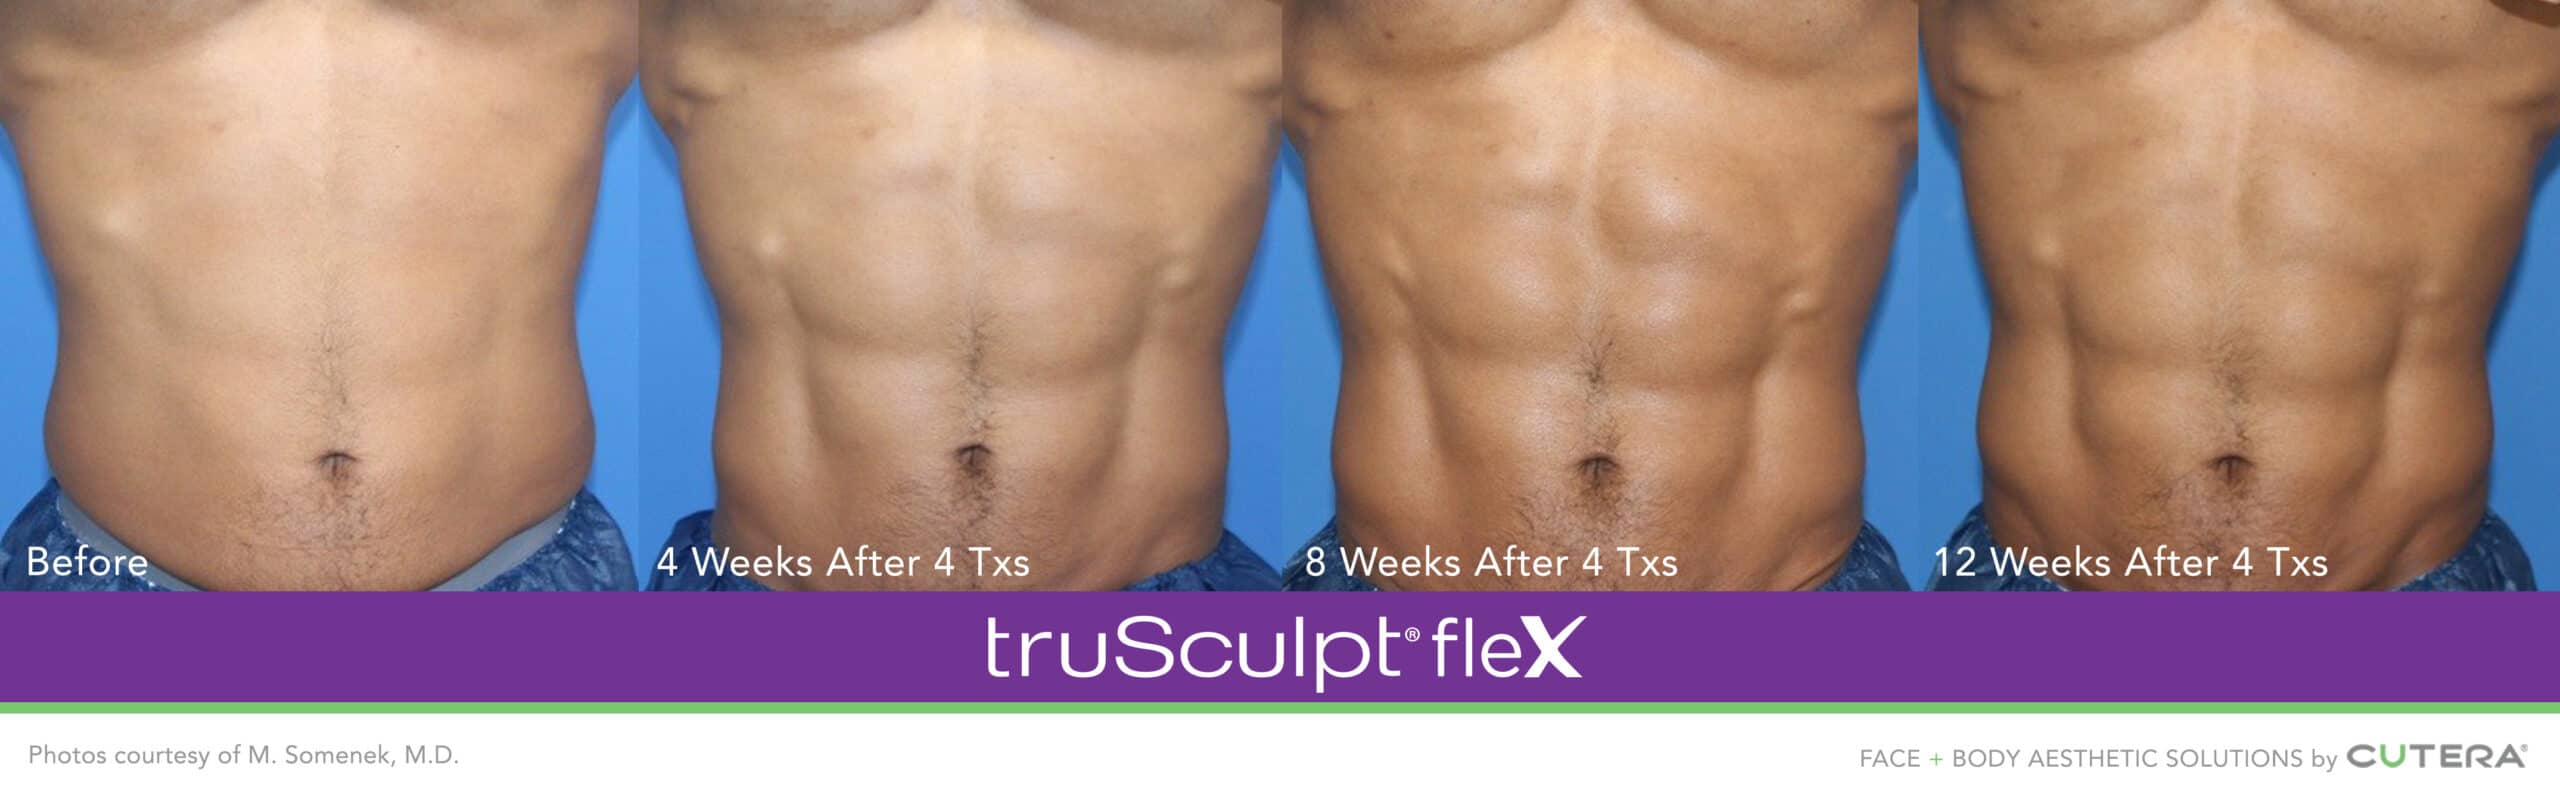 This Revolutionary Non-Invasive Body Sculpting Treatment is Helping Men  Build Muscle